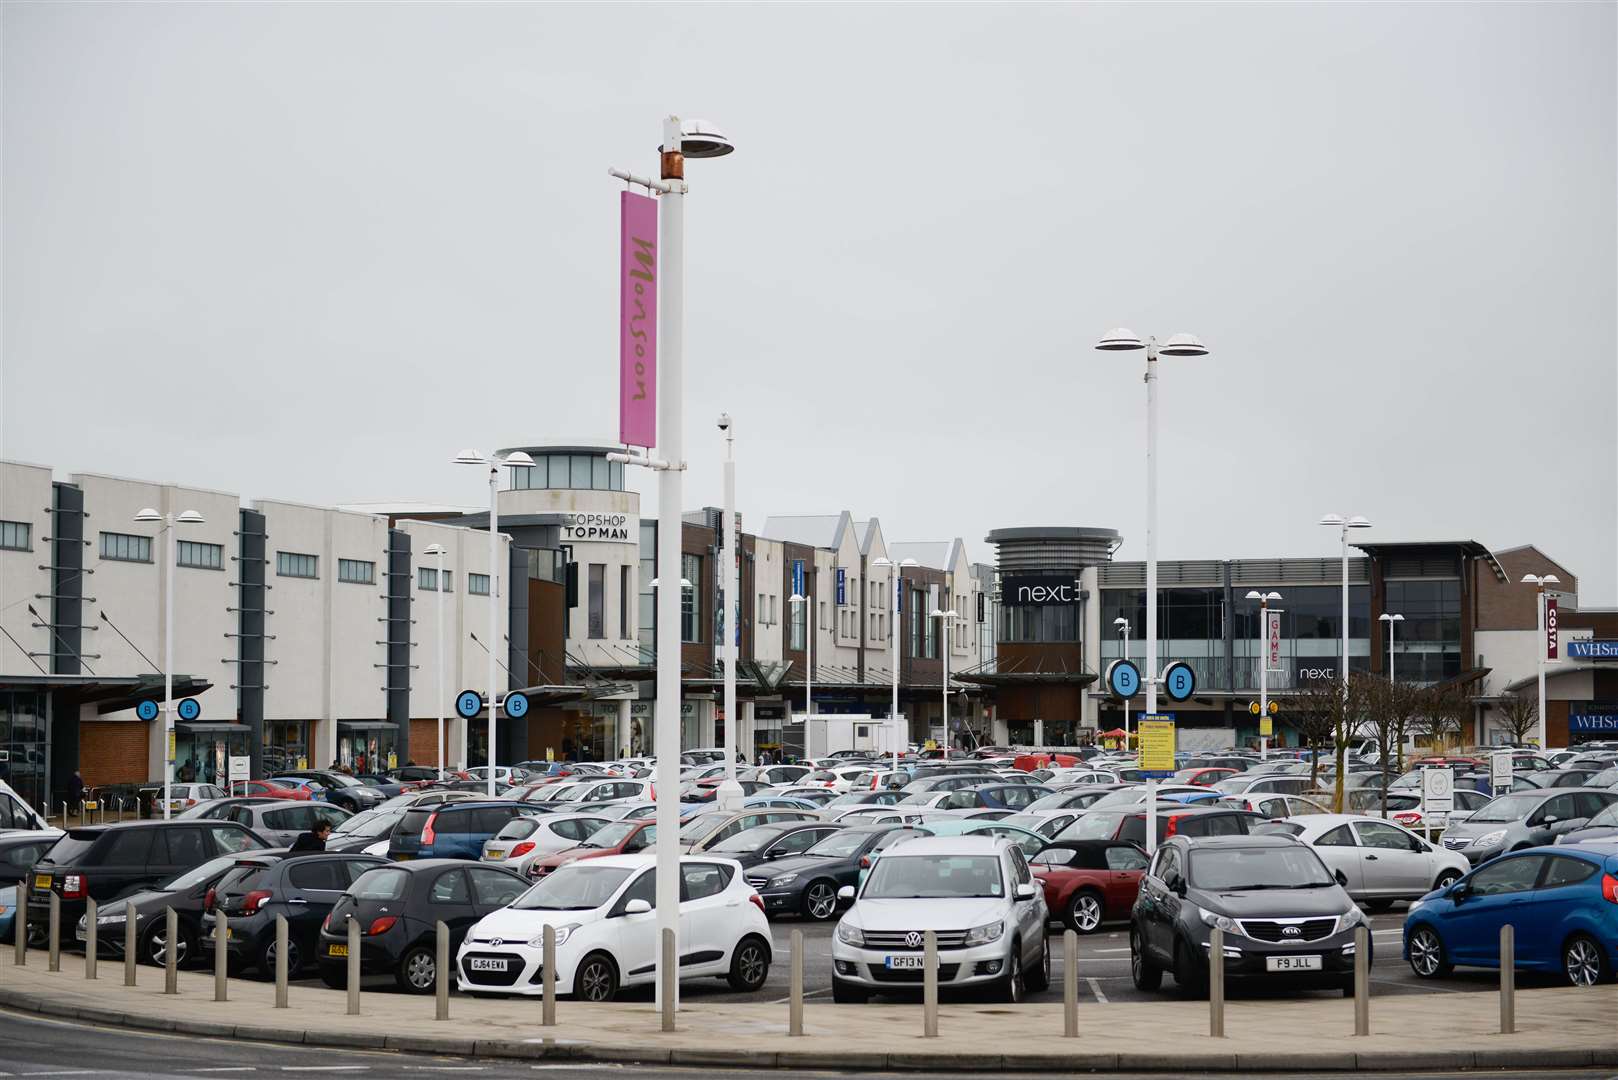 Westwood Cross Shopping Centre in Broadstairs